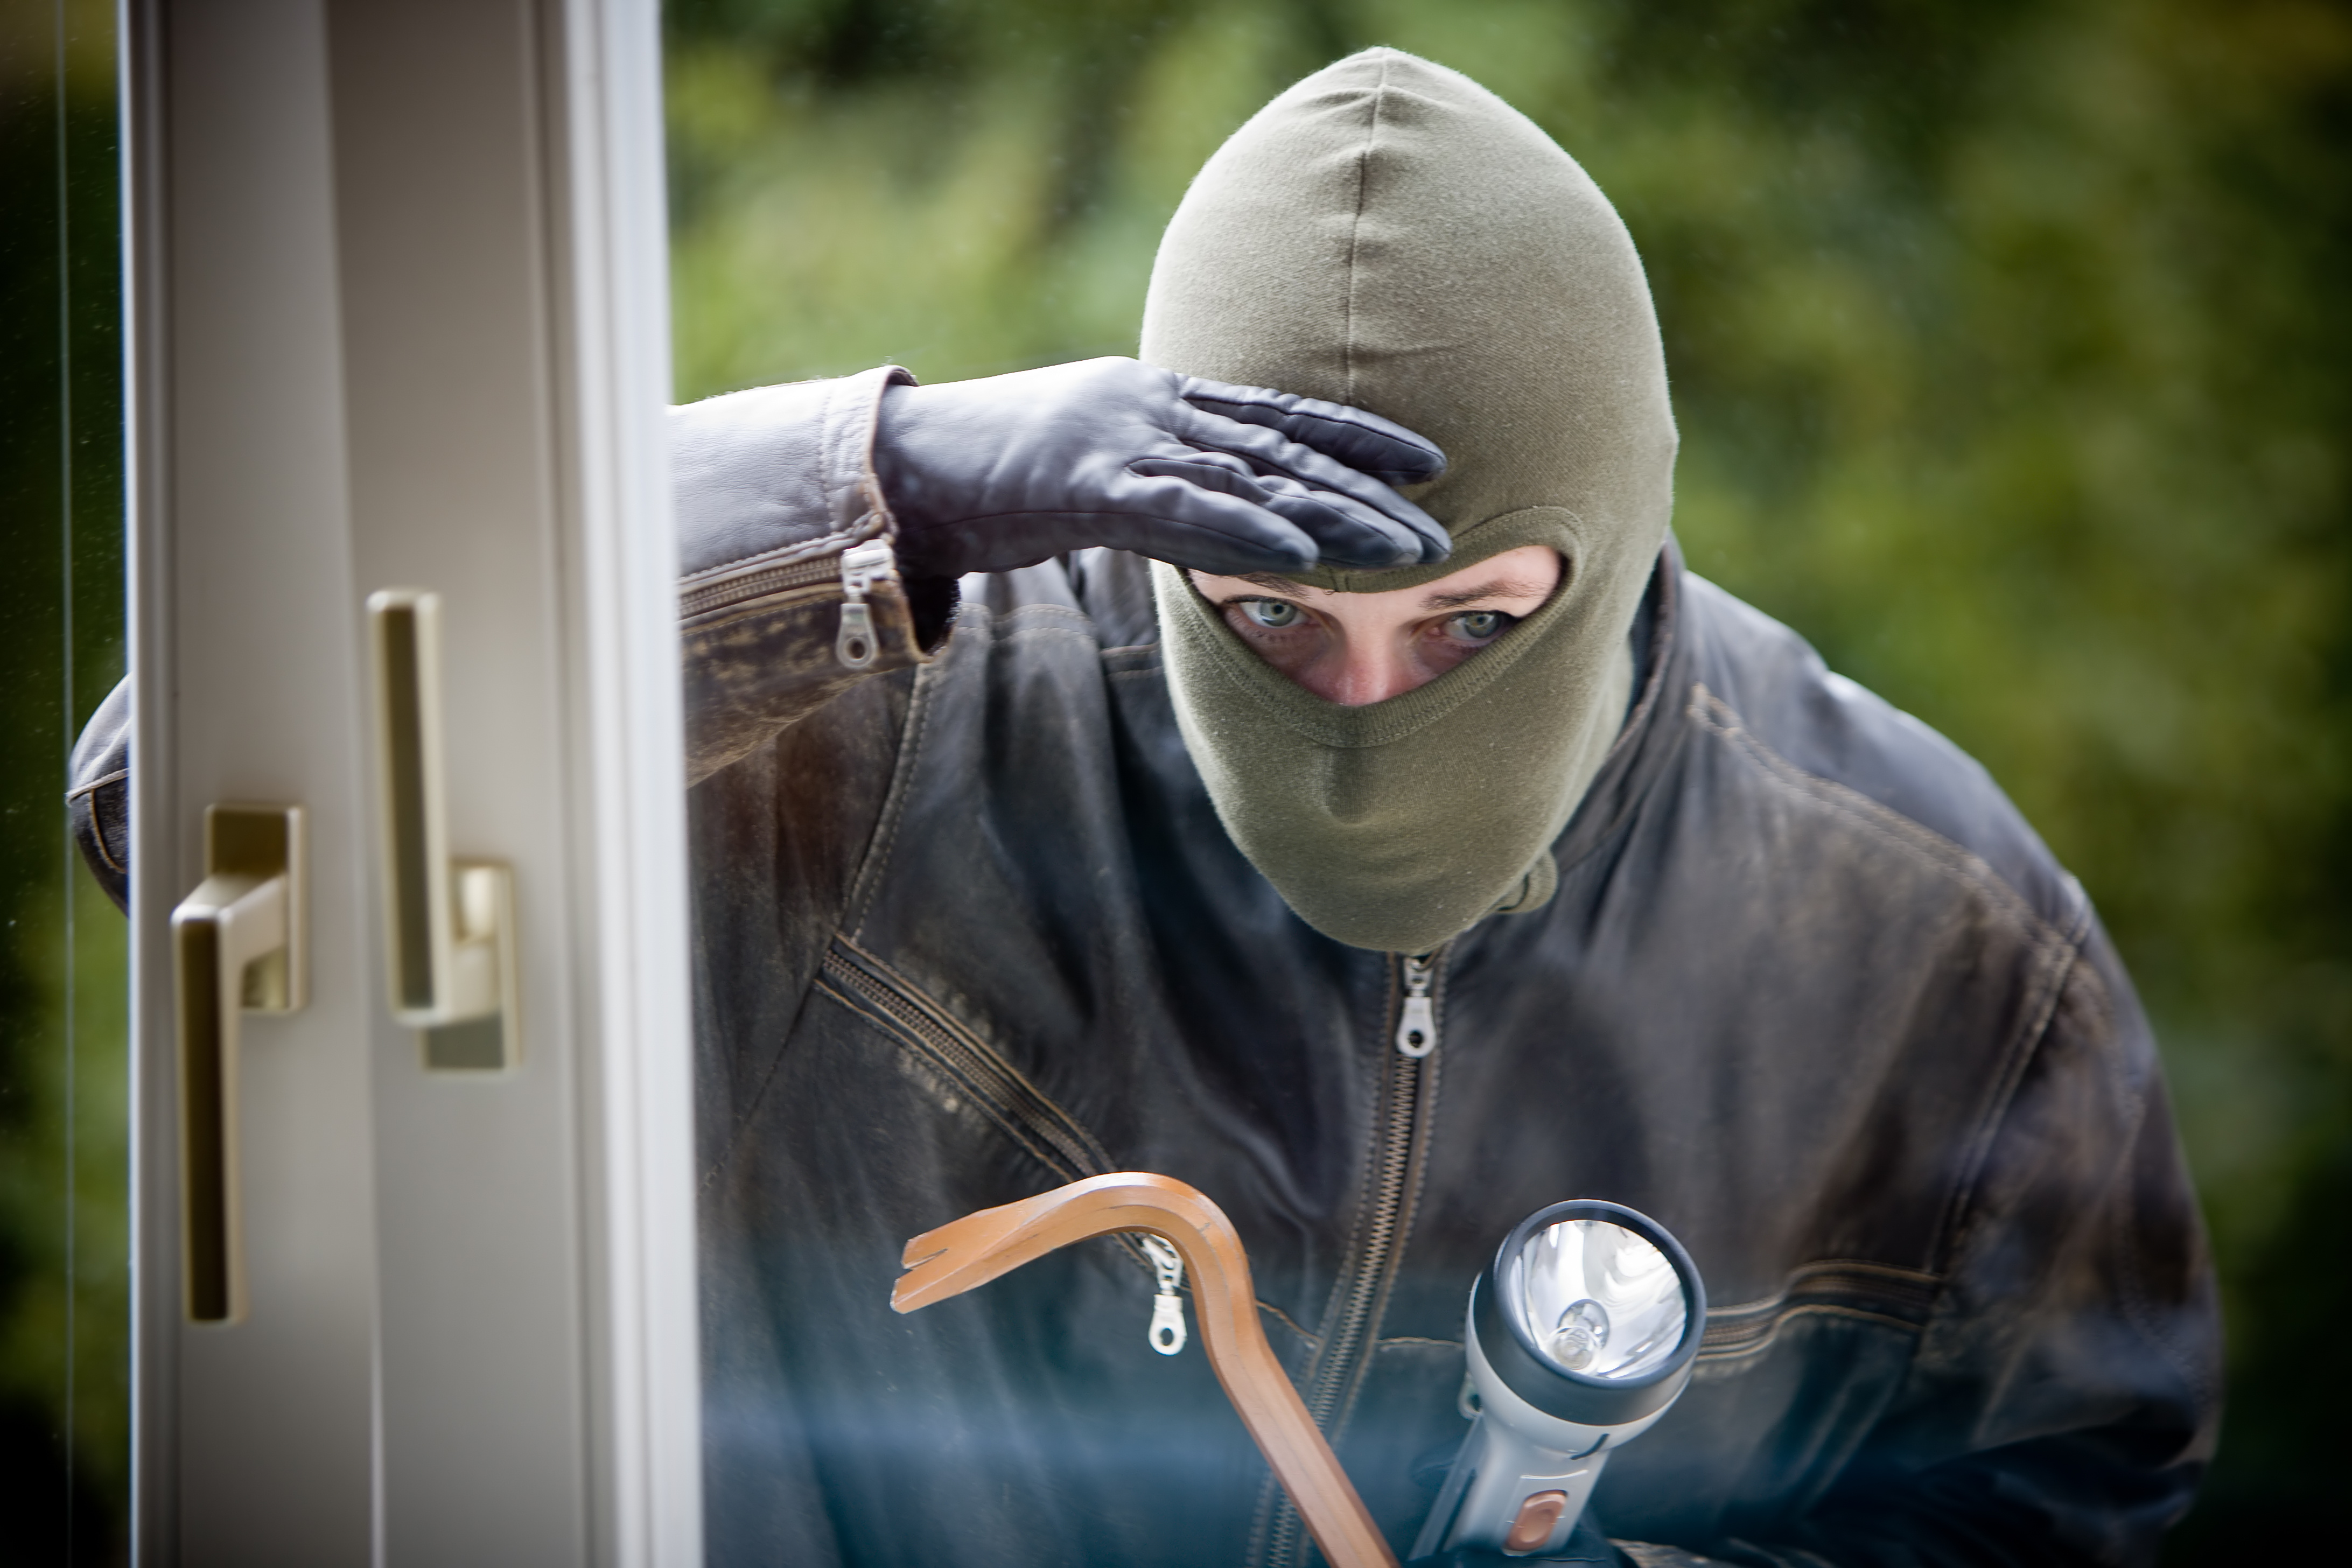 Youngs insurance provides tips on how to protect your property from burglars